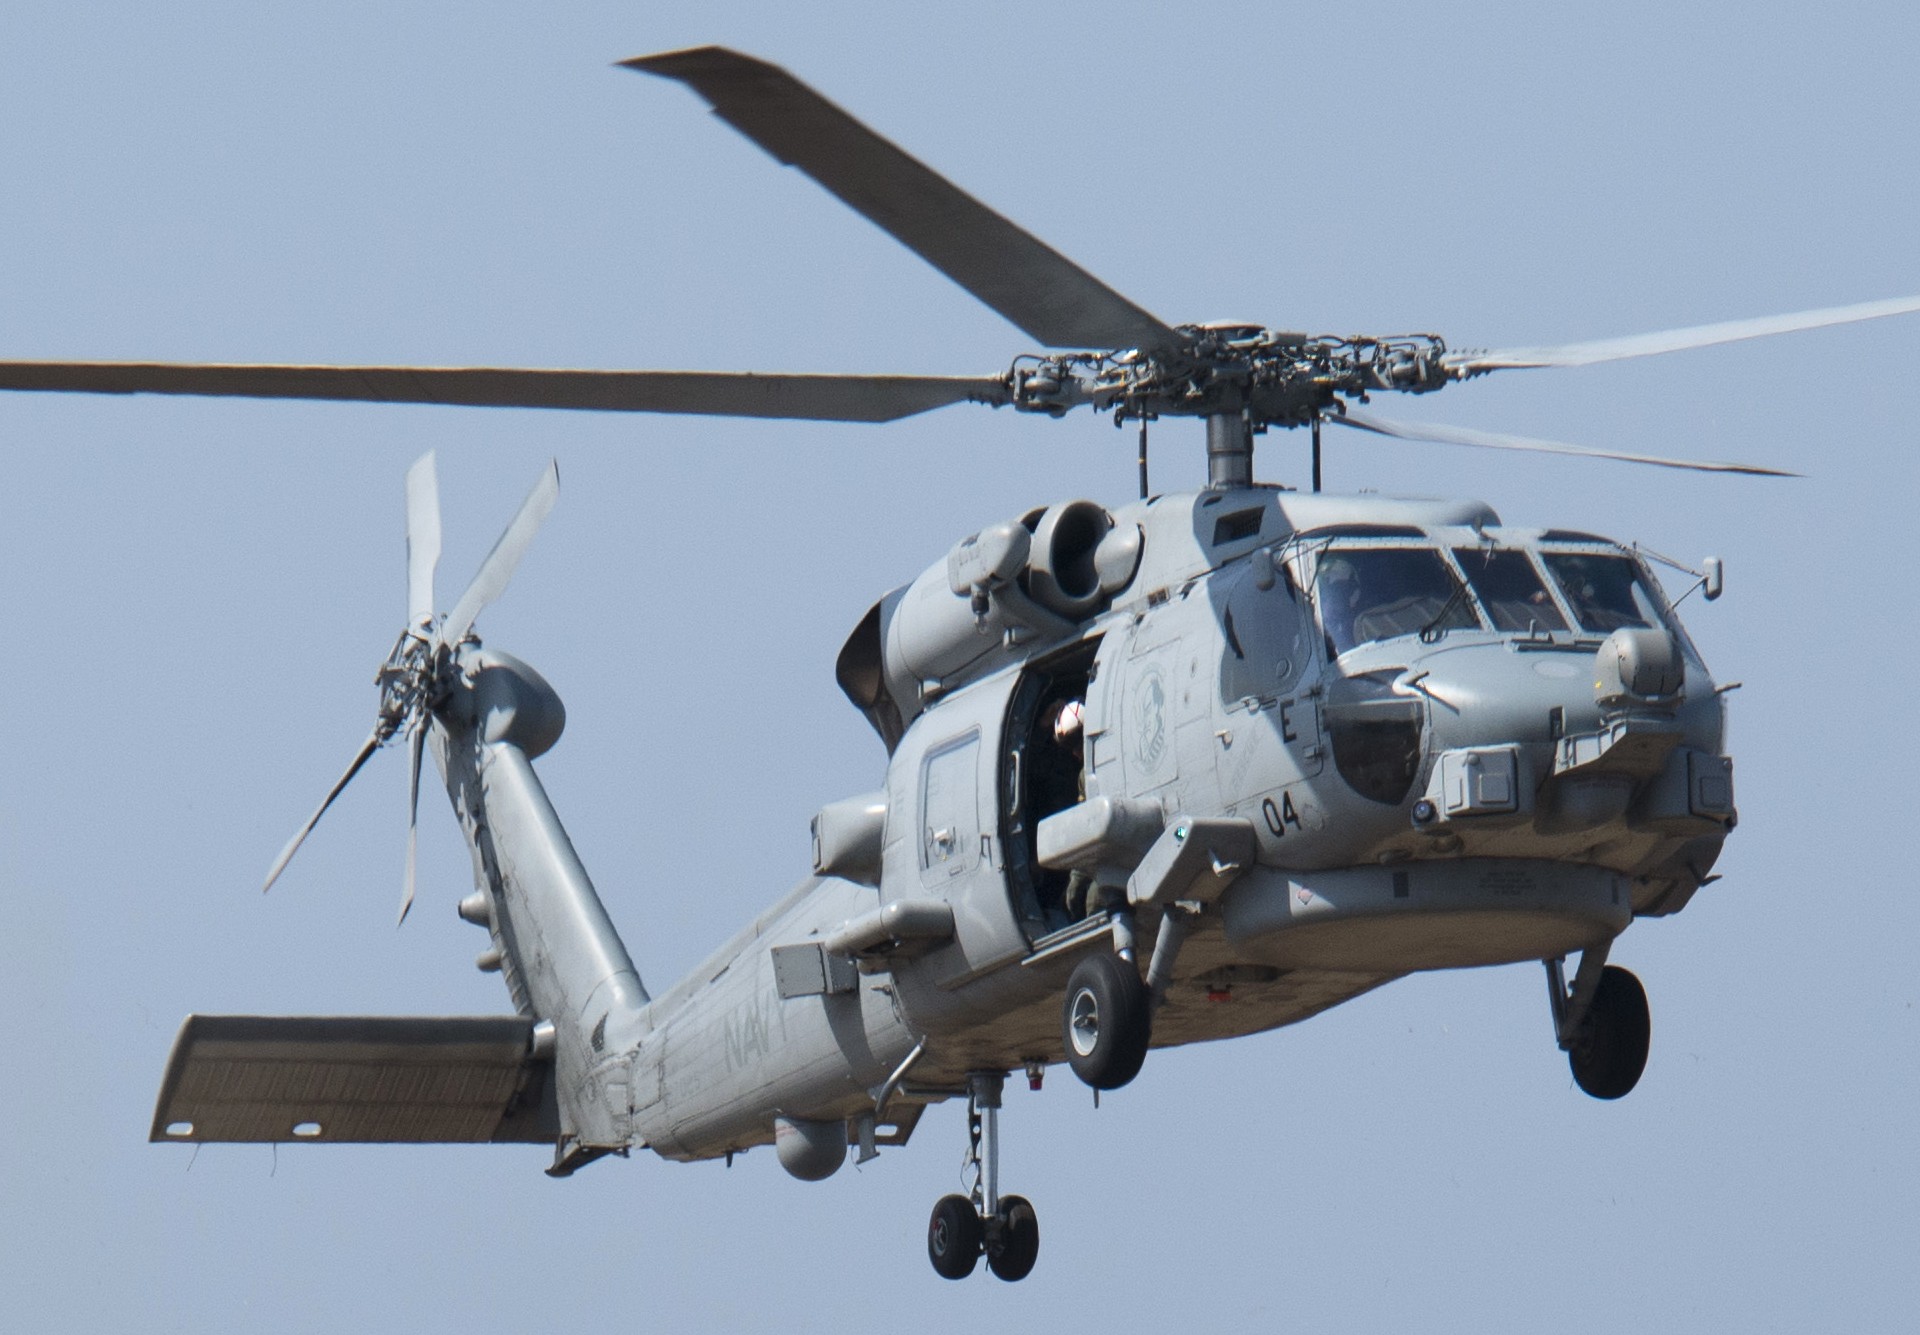 hsm-51 warlords helicopter maritime strike squadron mh-60r seahawk navy 2015 61 langkawi malaysia